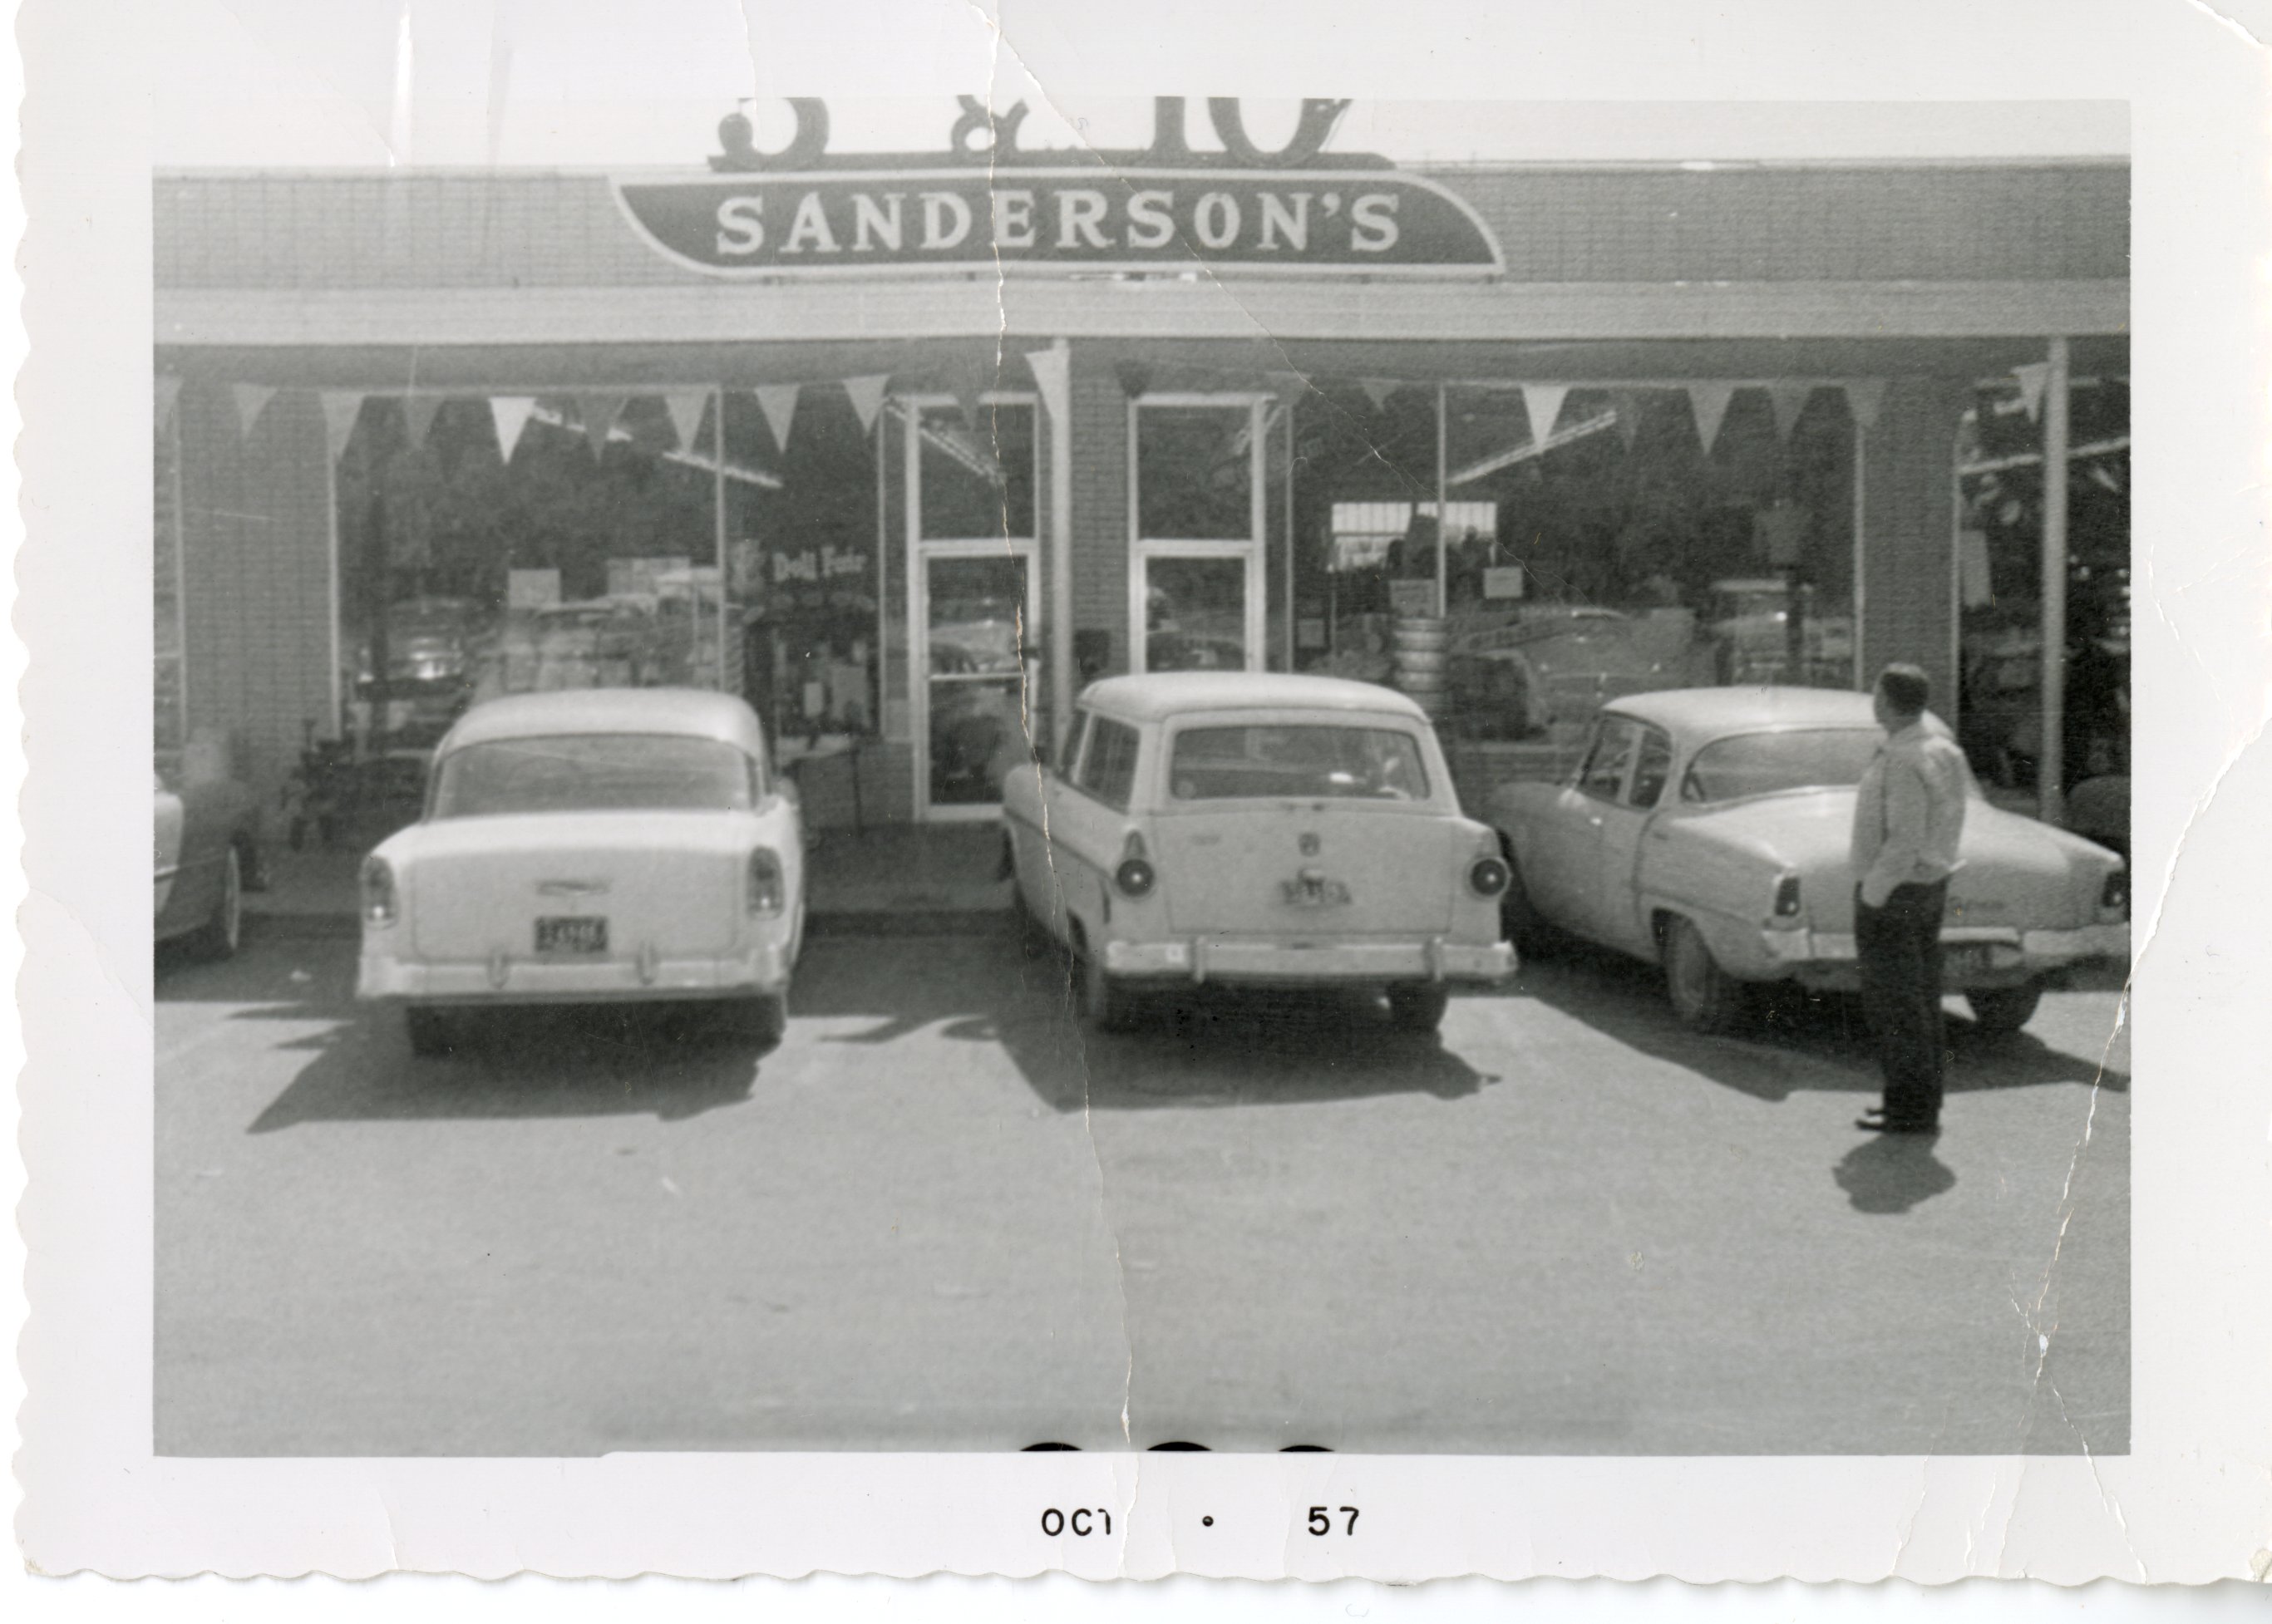 Facade of Sanderson's Variety Store in 1957